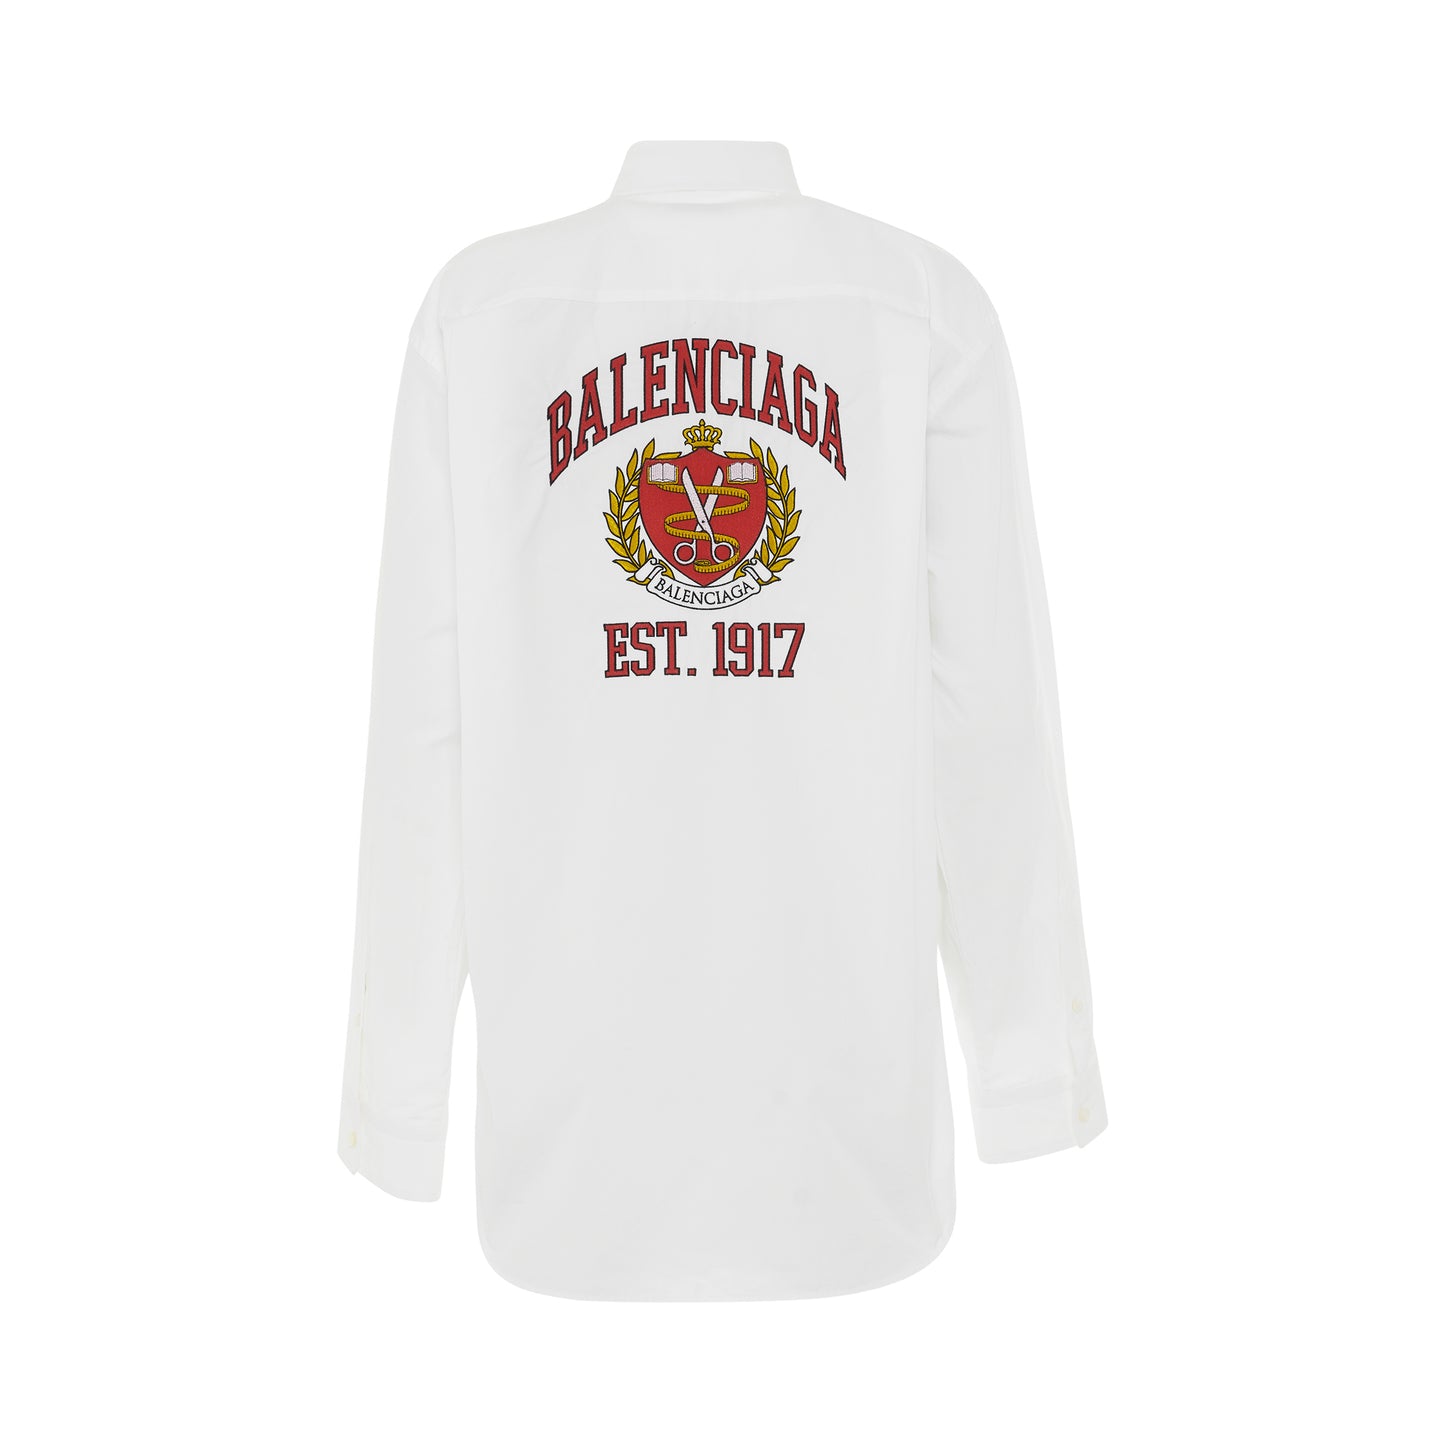 Emblem Large Fit Shirt in White